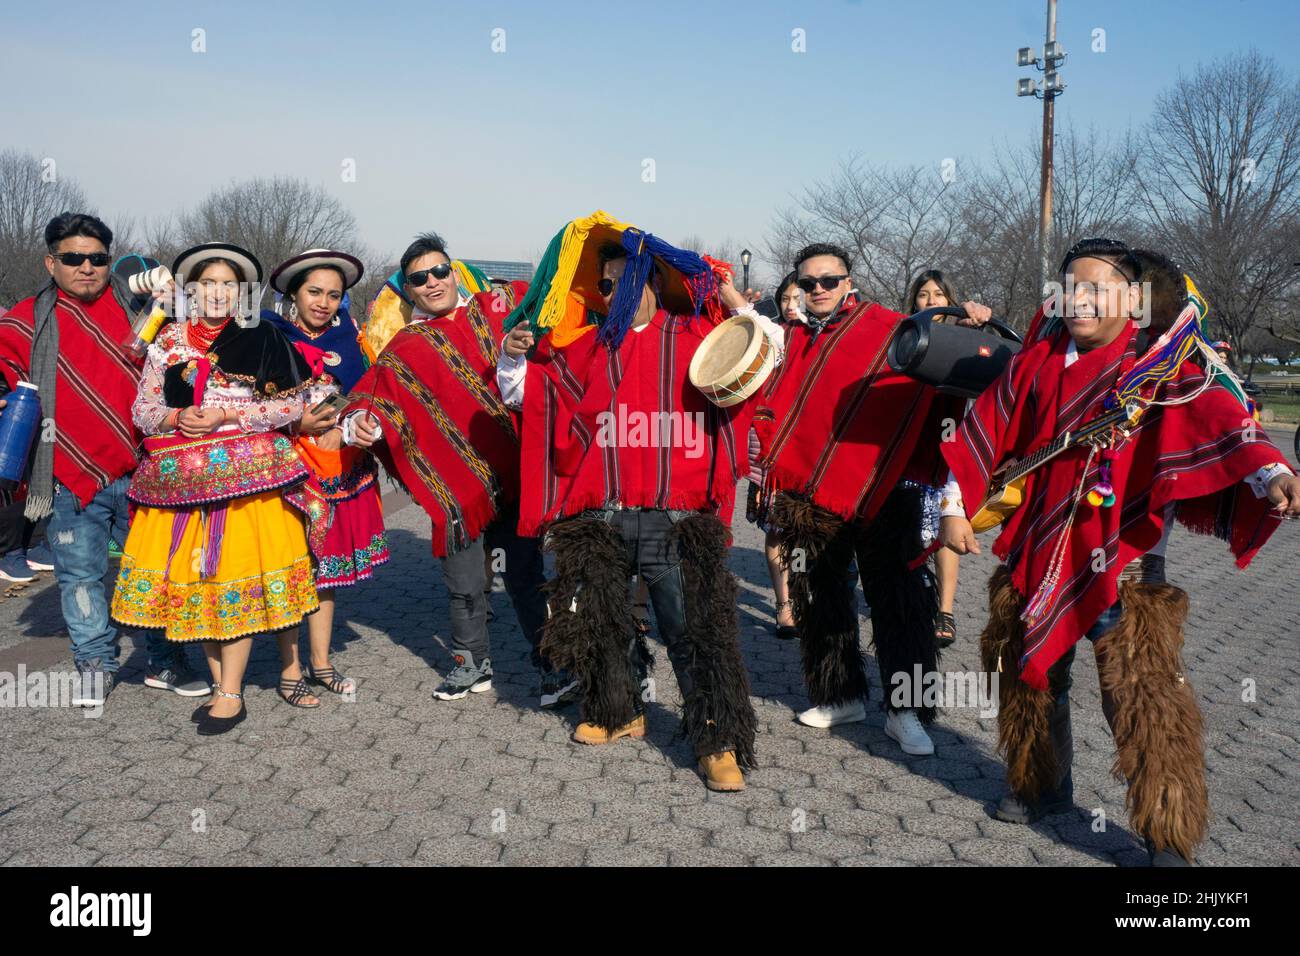 Posed group photo of Ecuadorian dancers & musicians at Flushing Meadows Corona park for a video shoot. In Queens, New York City, a very diverse place. Stock Photo